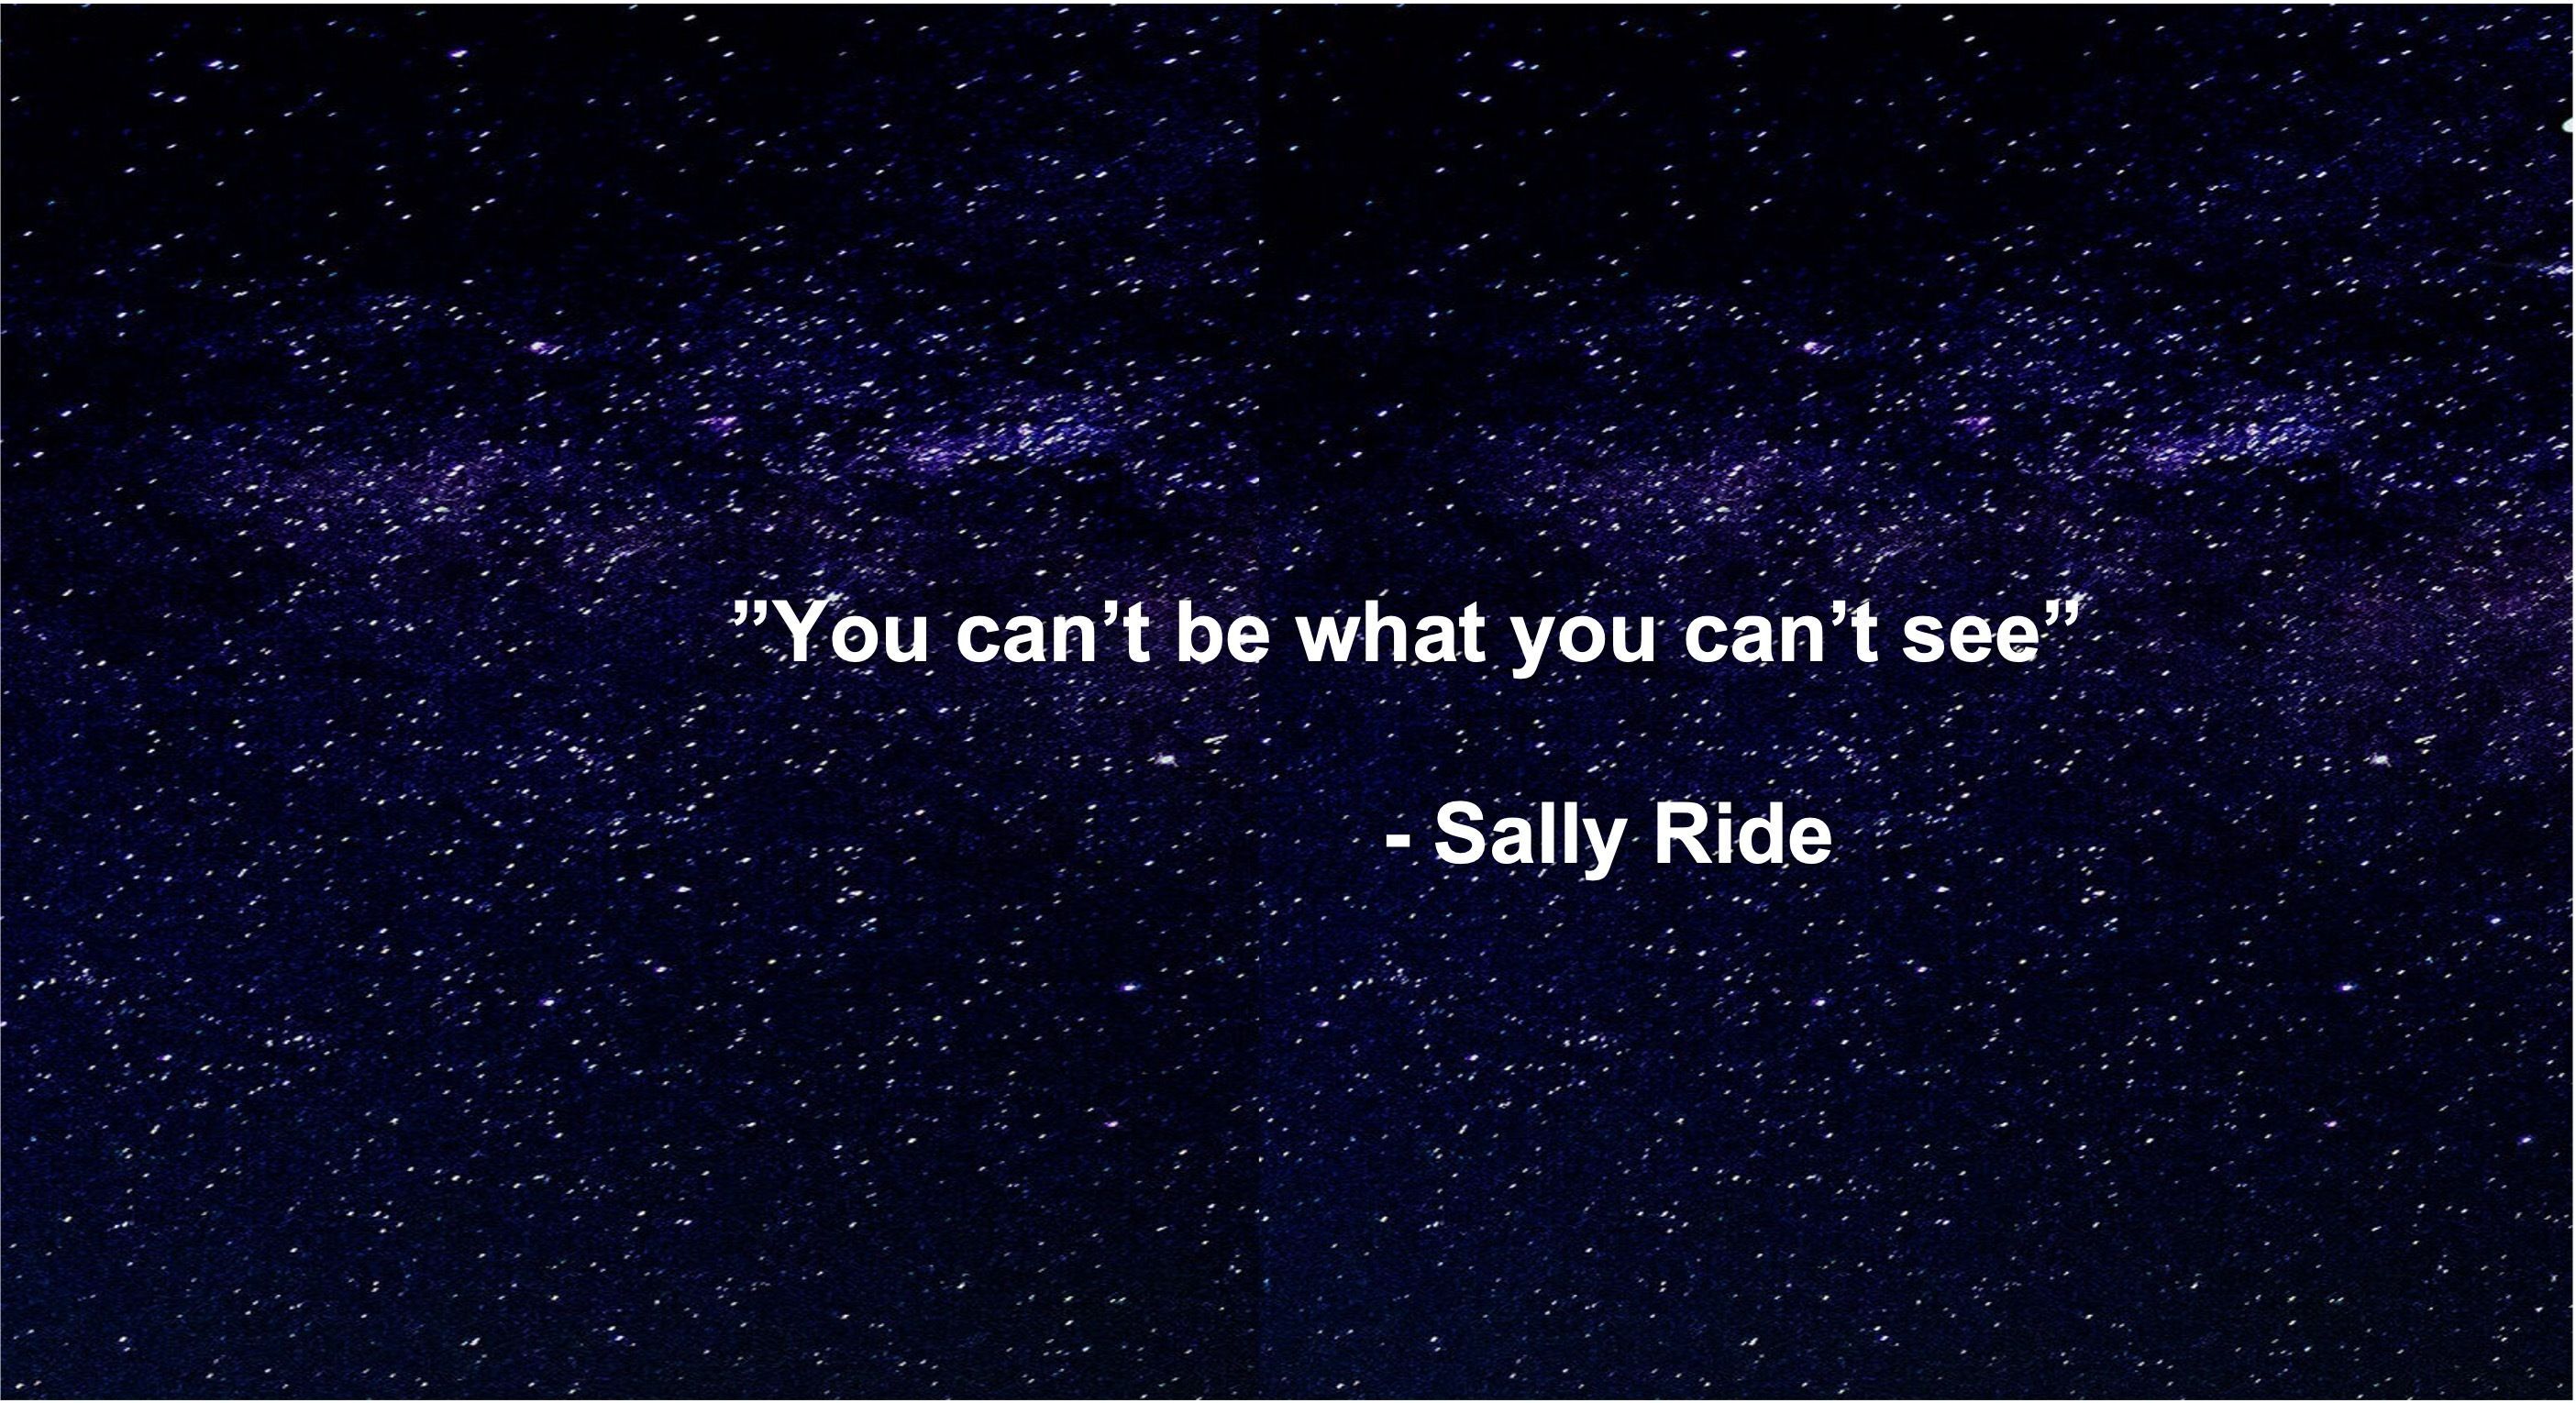 "You can't be what you can't see". Sally Ride